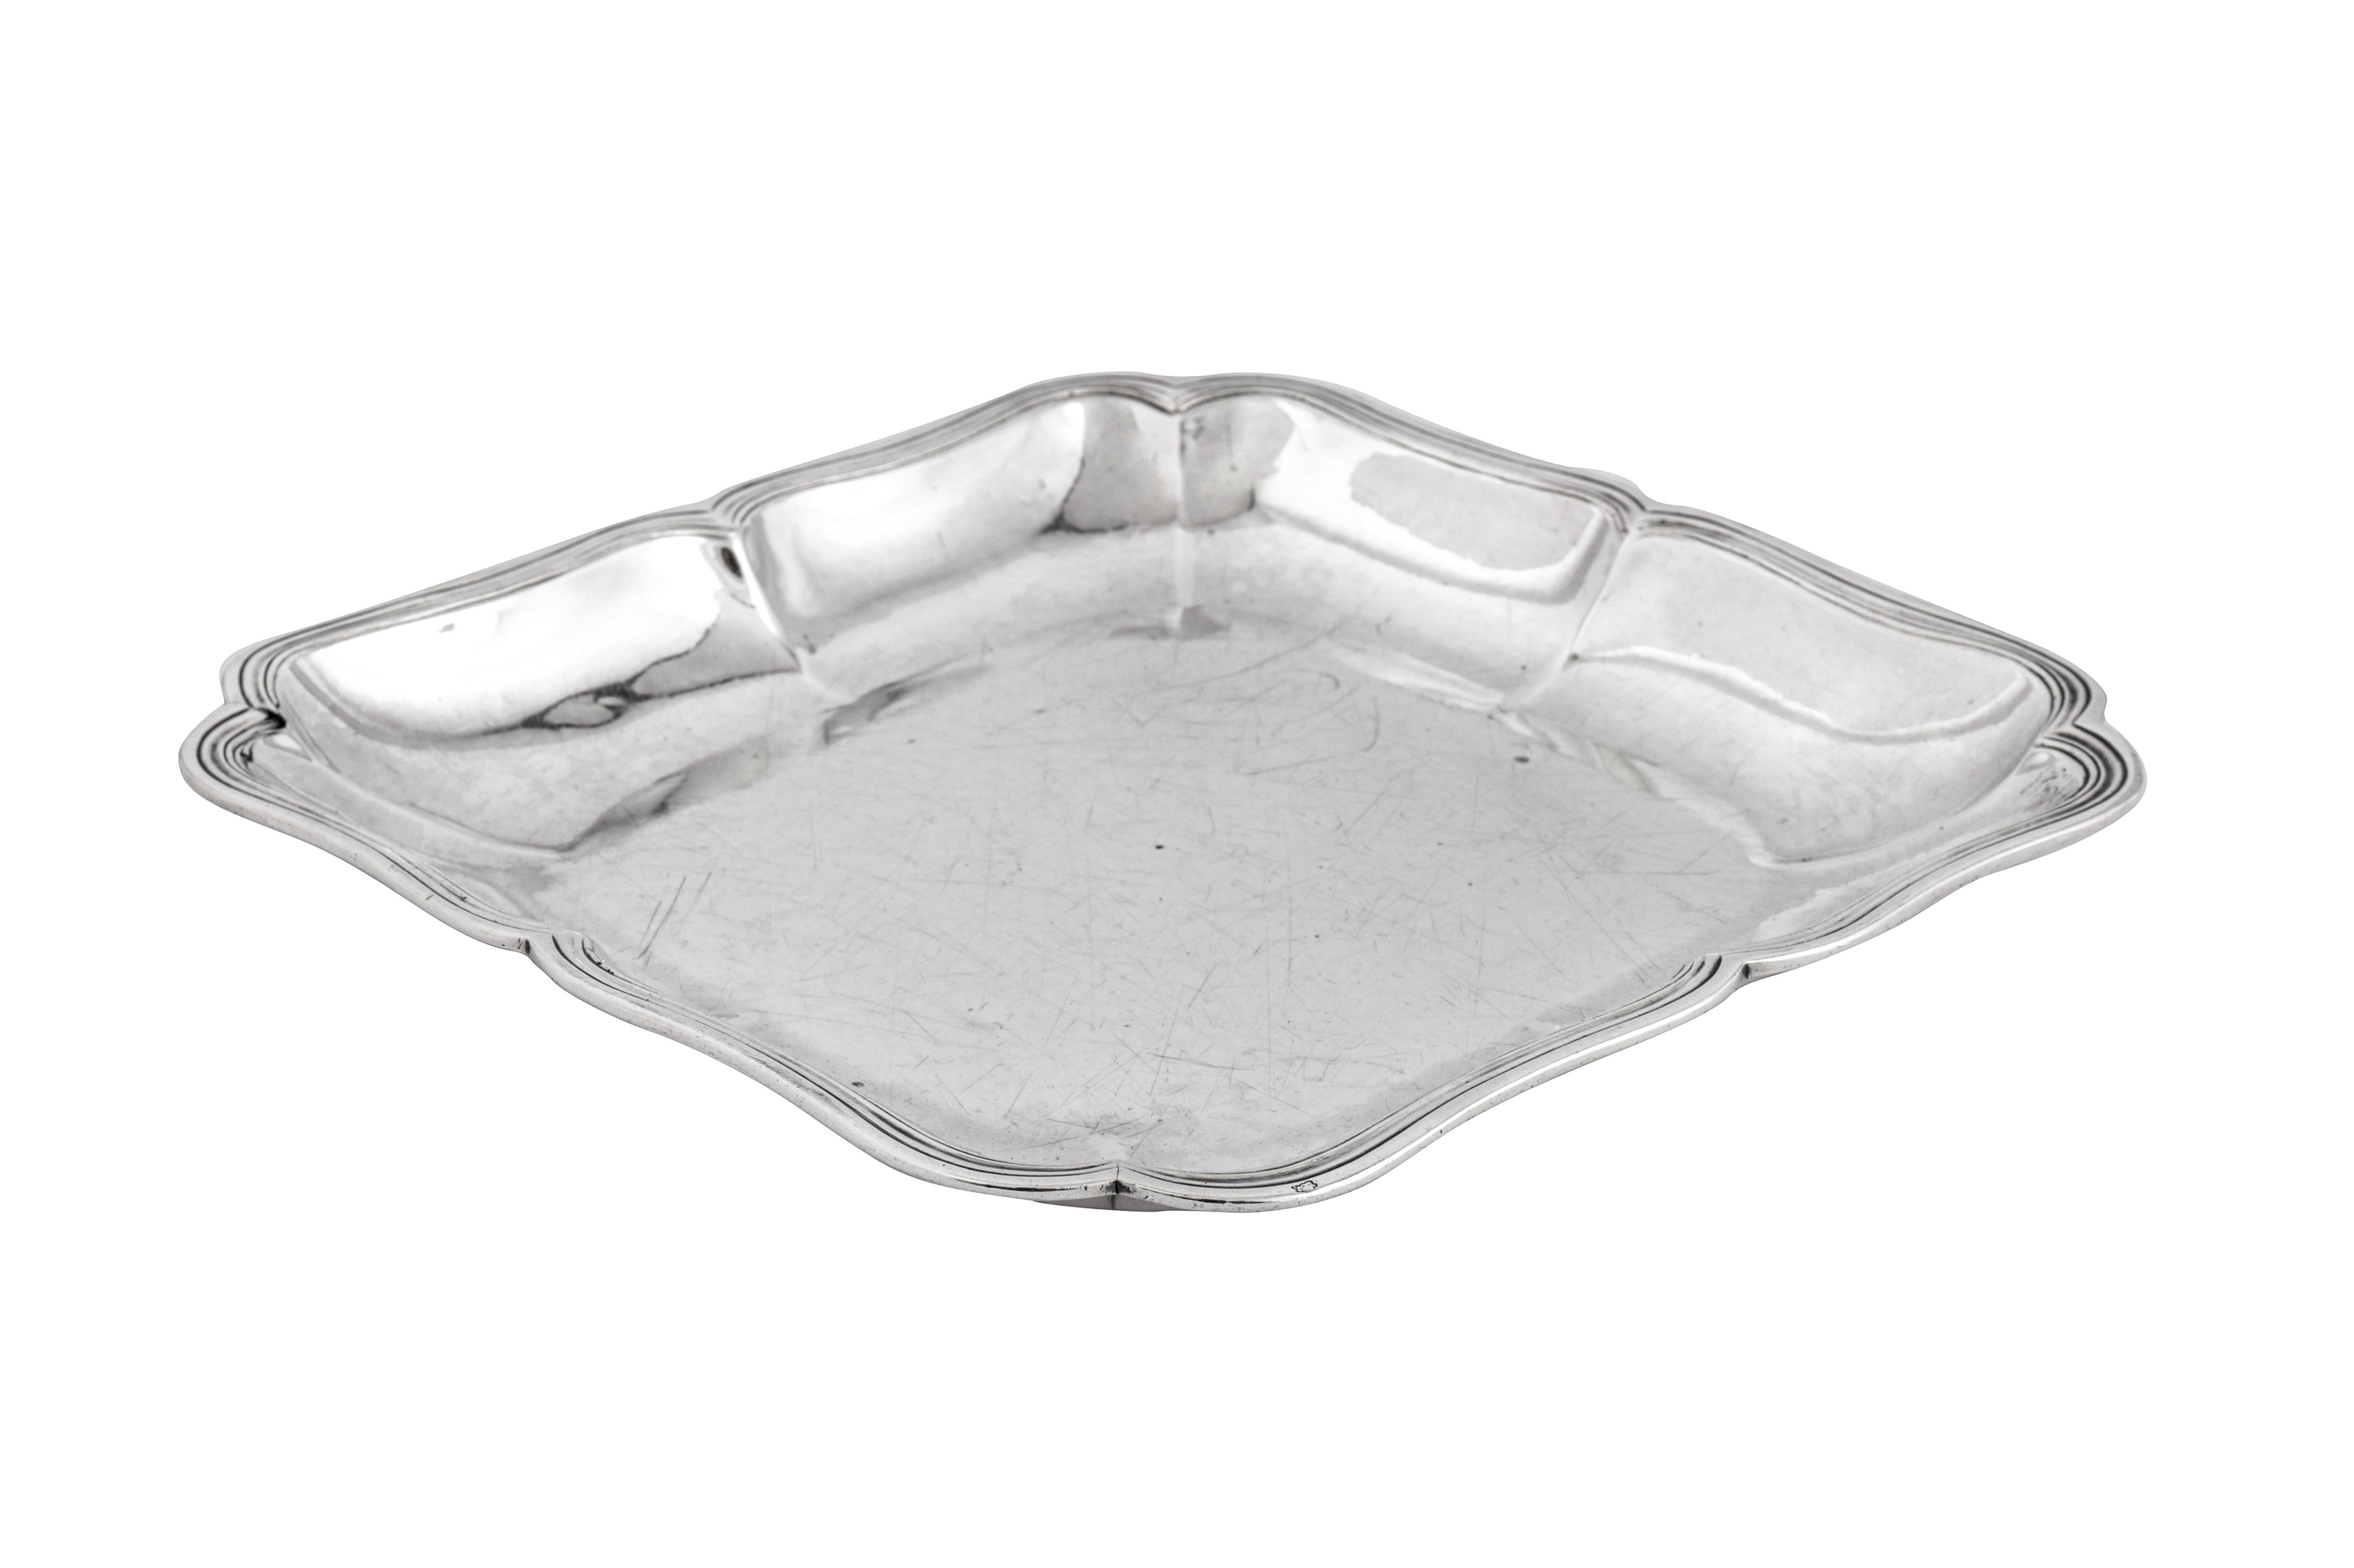 A Louis XV mid-18th century French silver second course dish, Paris 1755 by Michel Maillard (reg. 15